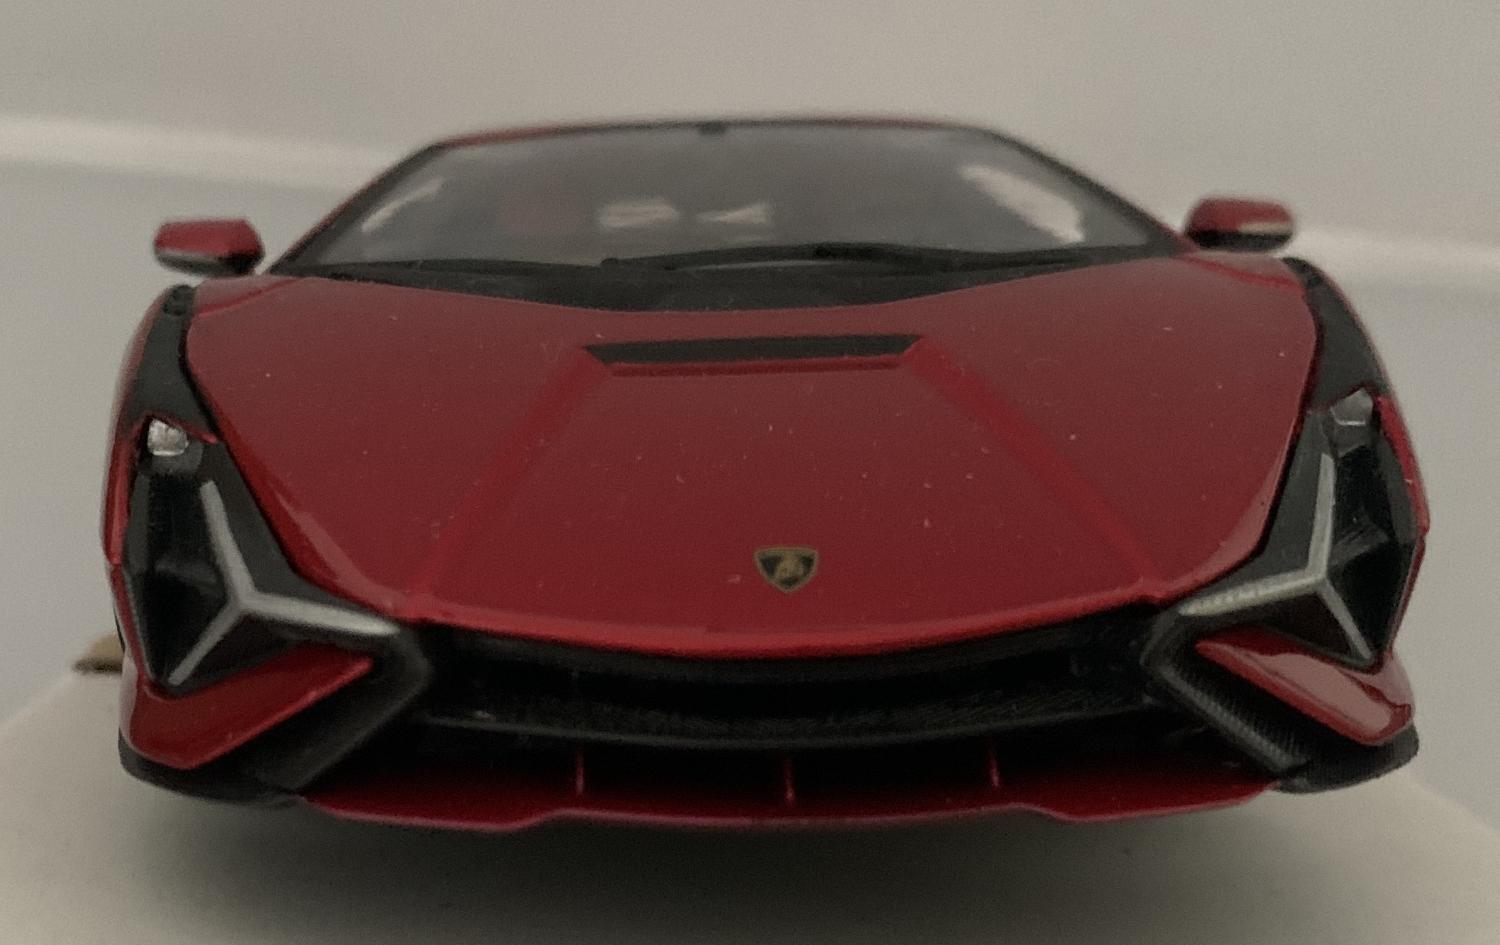 The Lamborghini Sian FKP 37 is decorated in metallic red with carbon effect trims and authentic graphics.